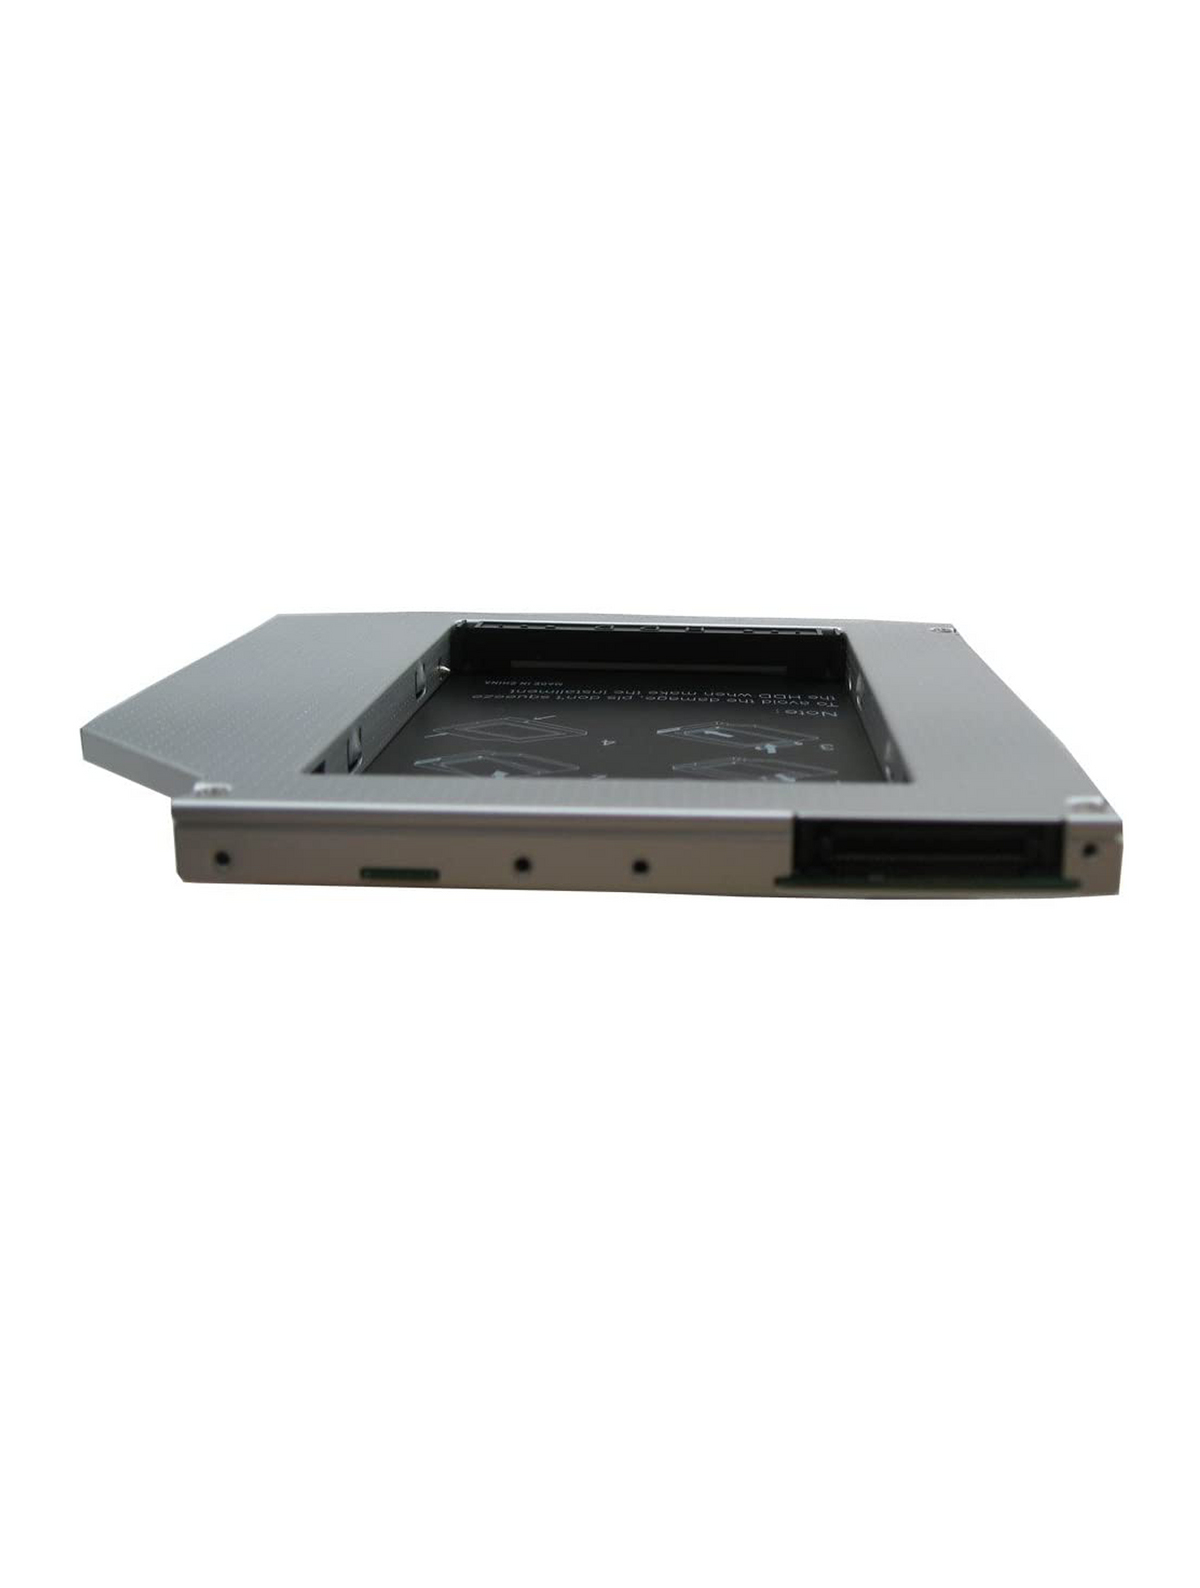 HARD DRIVE TRAY CADDY COMPATIBLE FOR MACBOOK 13" A1181 (2006-2009)